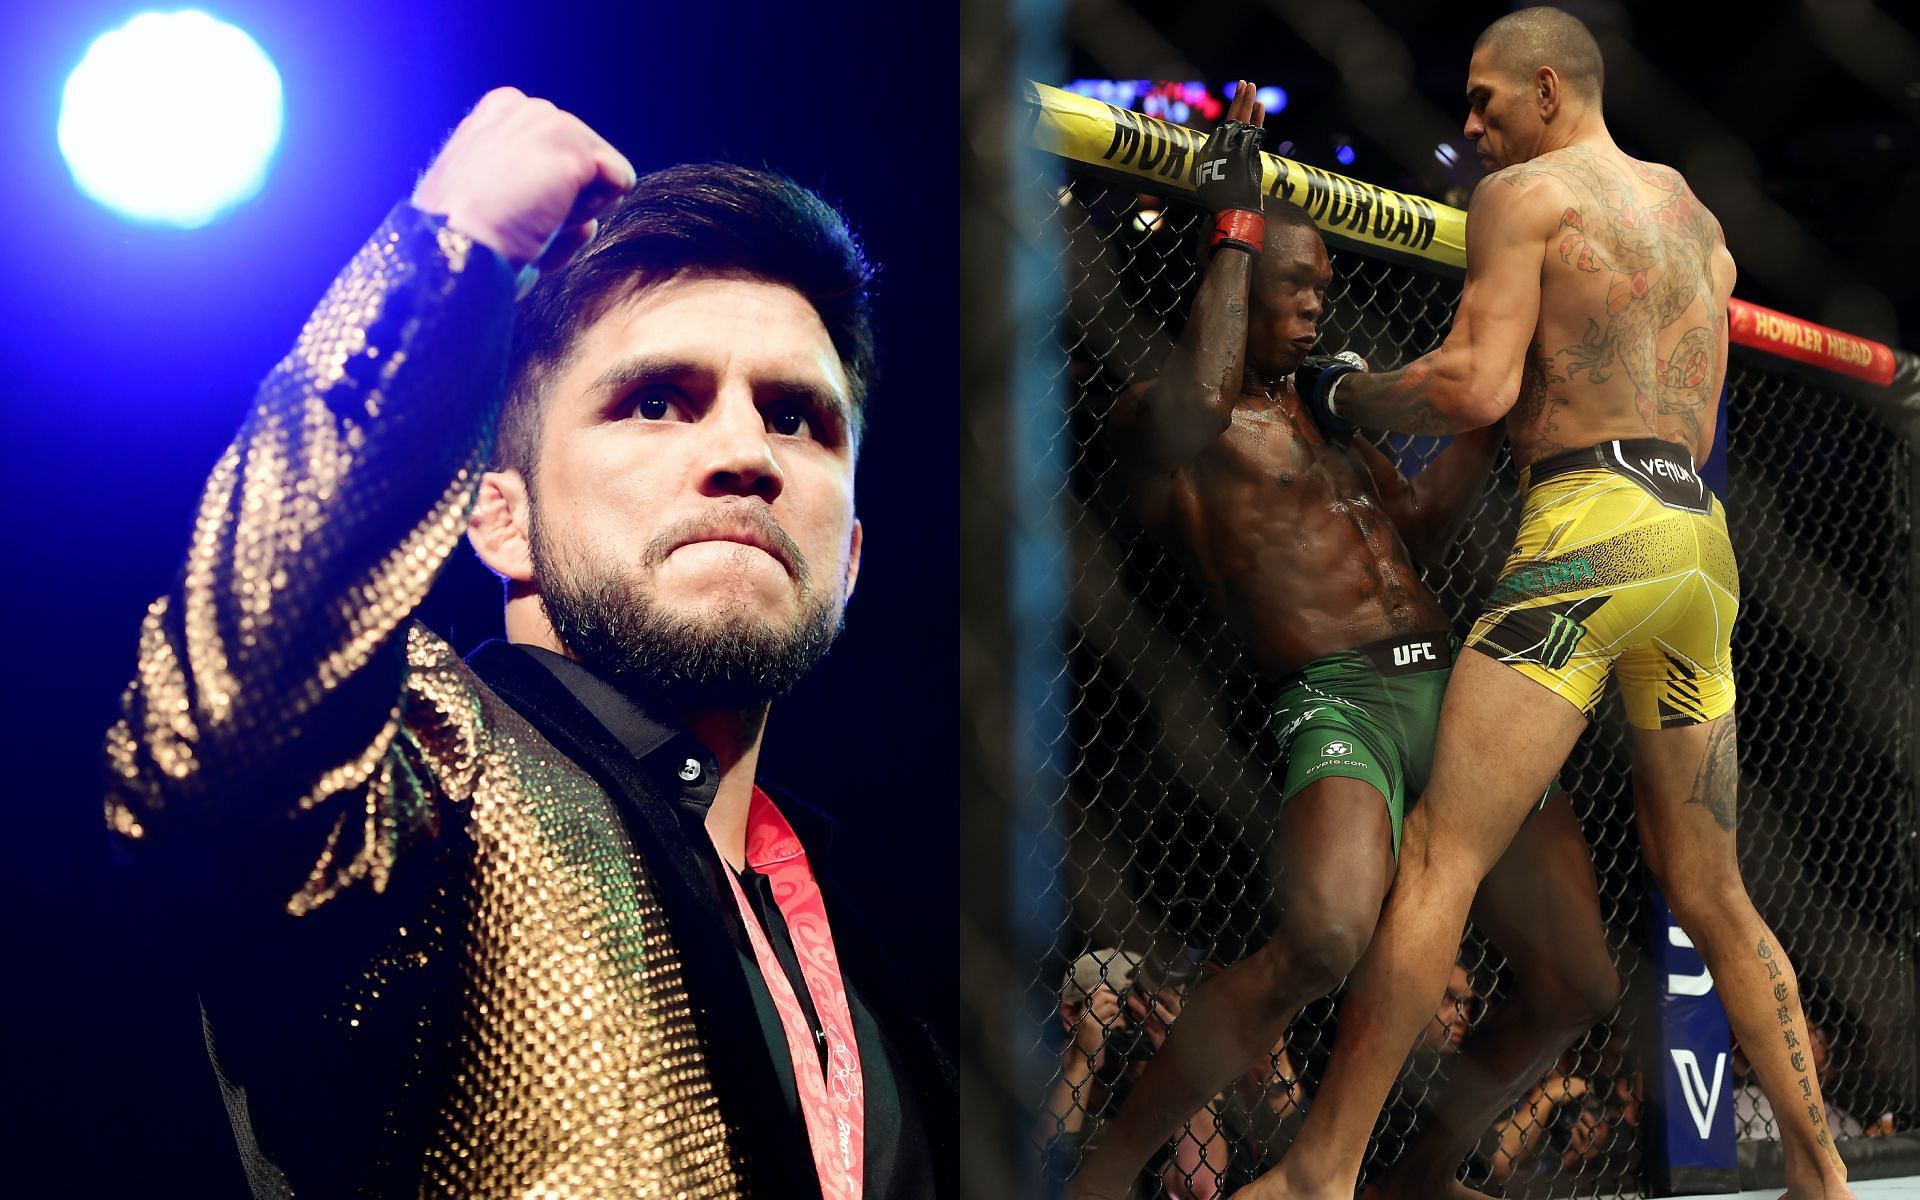 Henry Cejudo (left) and Israel Adesanya vs Alex Pereira at UFC 281 (right) [Image Courtesy: Getty Images] 